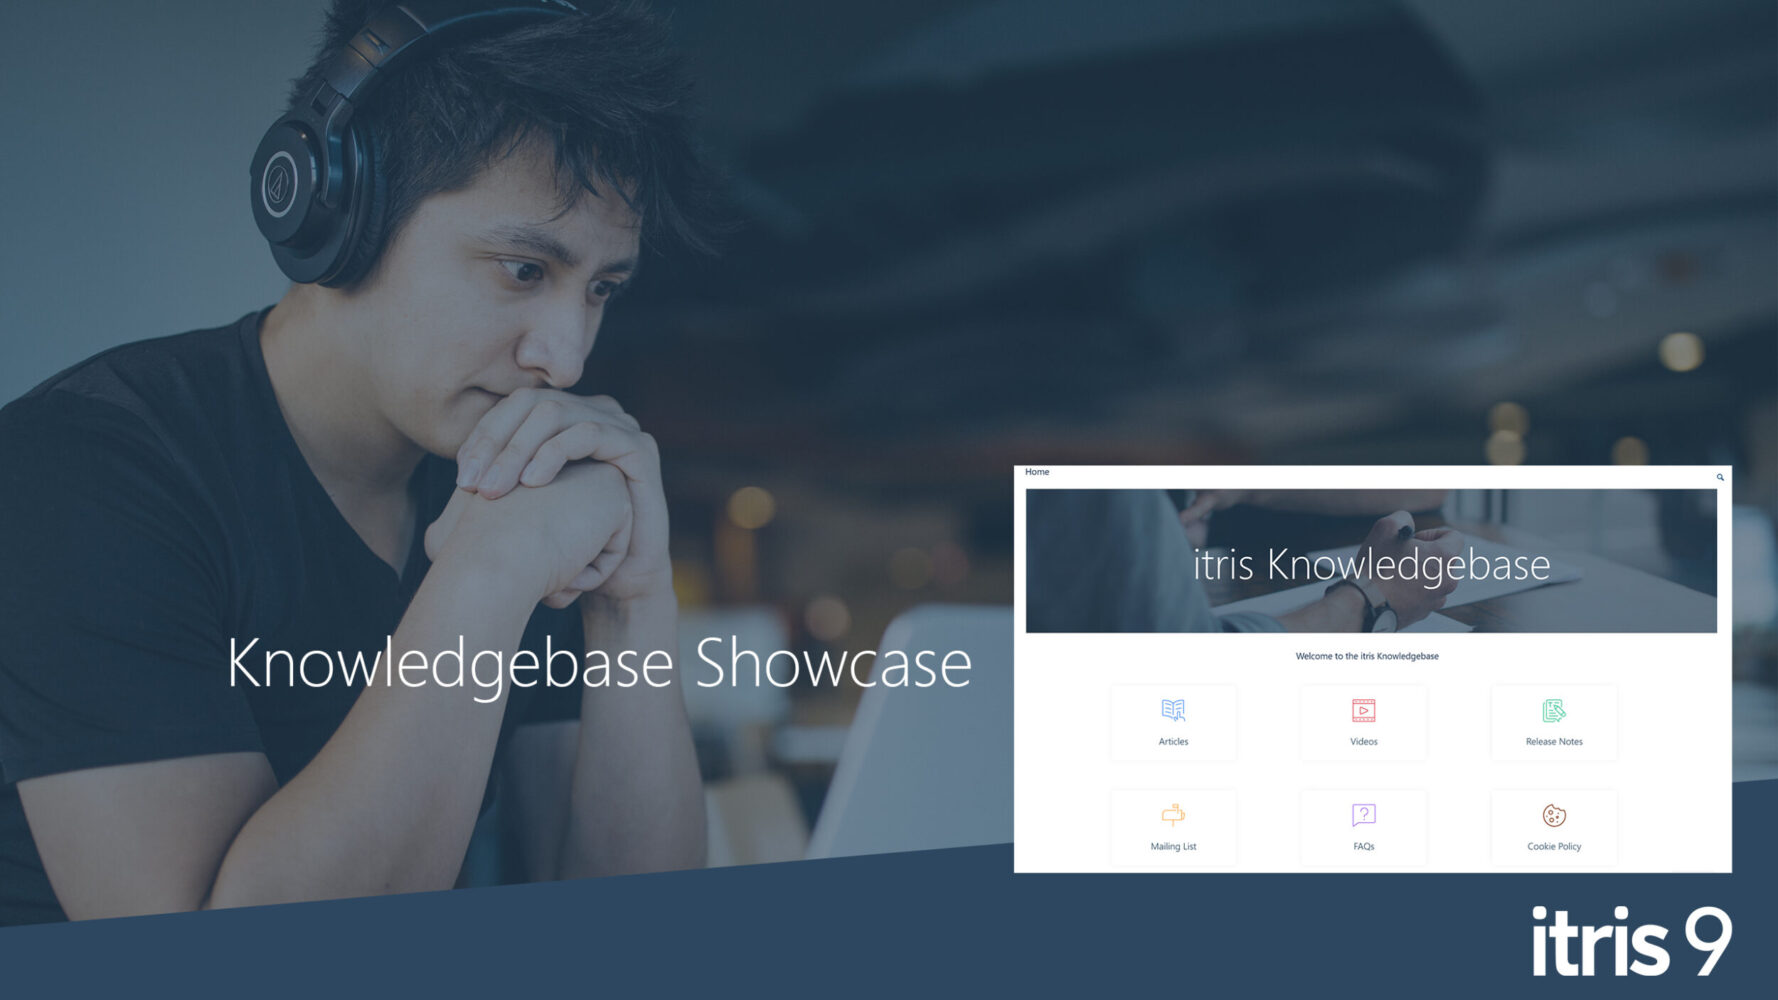 Recruitment CRM software itris 9 | Knowledgebase | Showcase Video